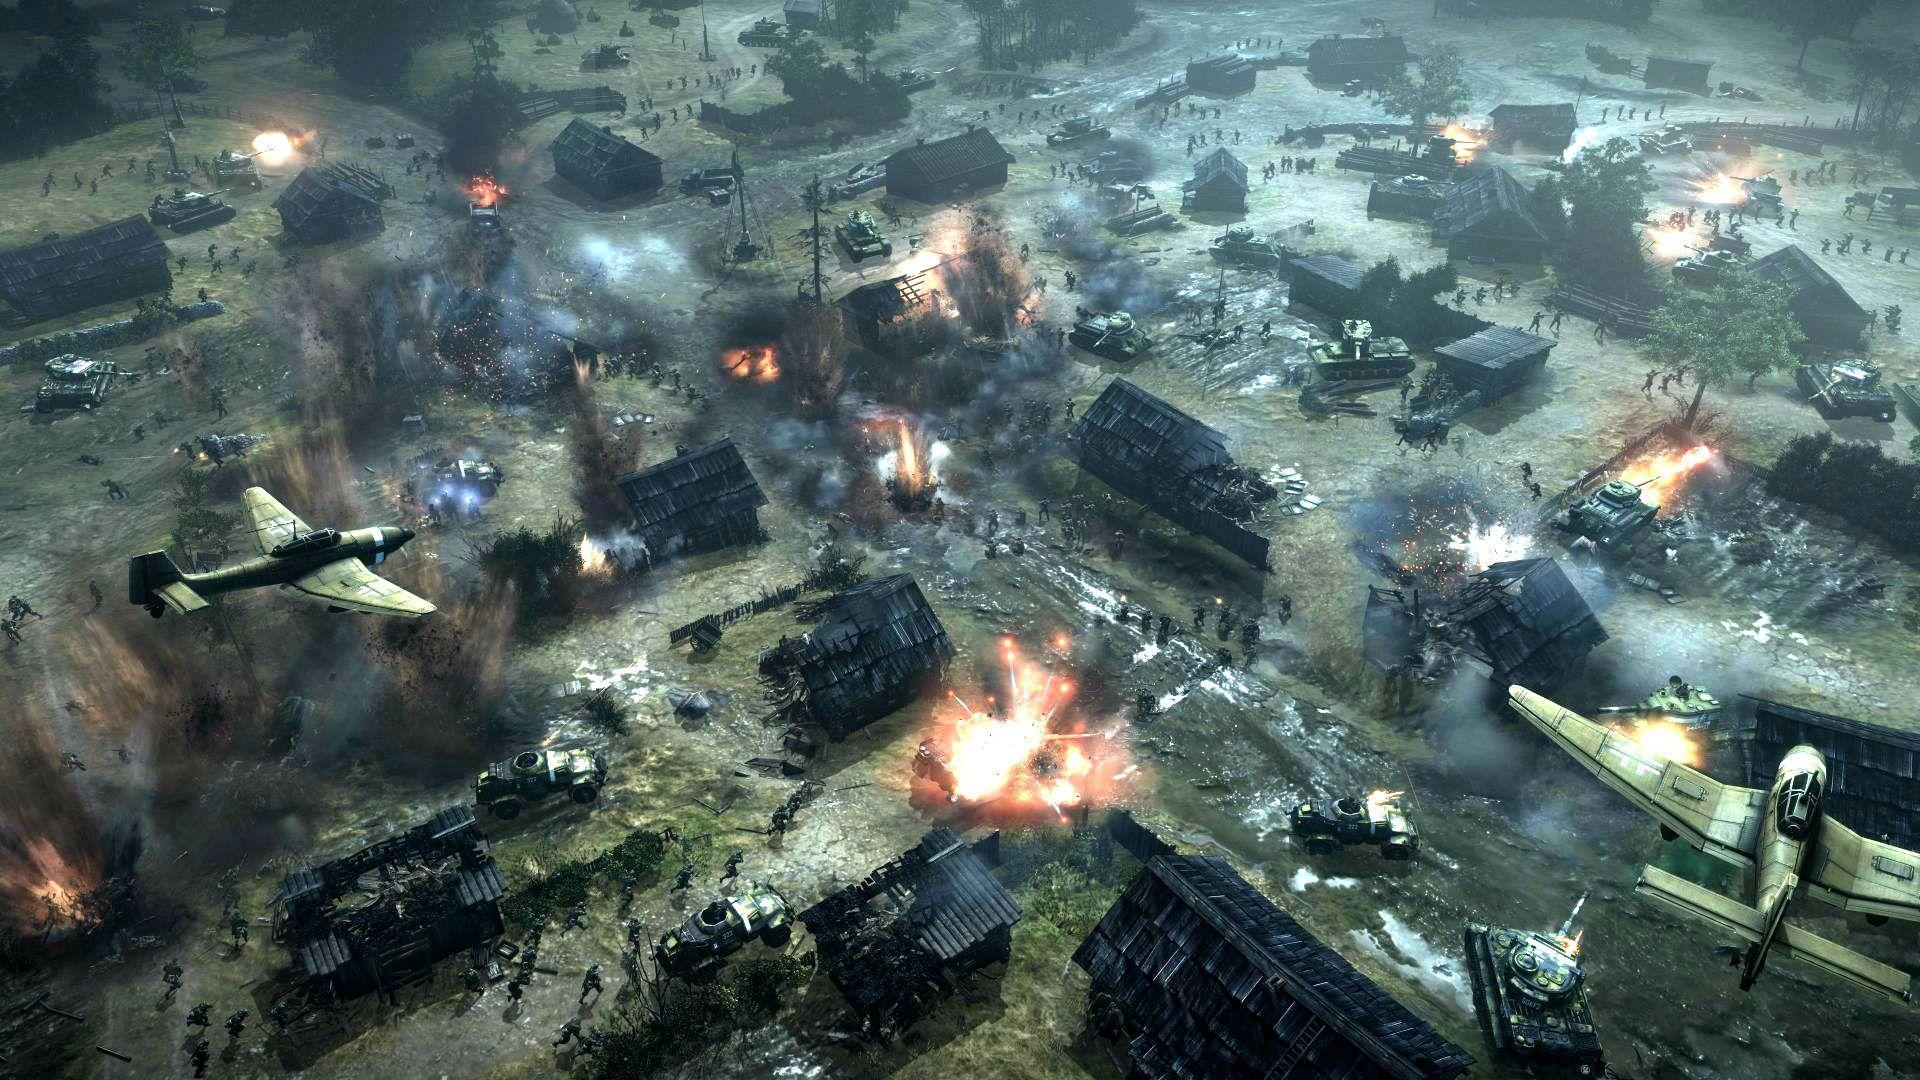 Company of Heroes 2 Video Game wallpaper (59 Wallpaper)